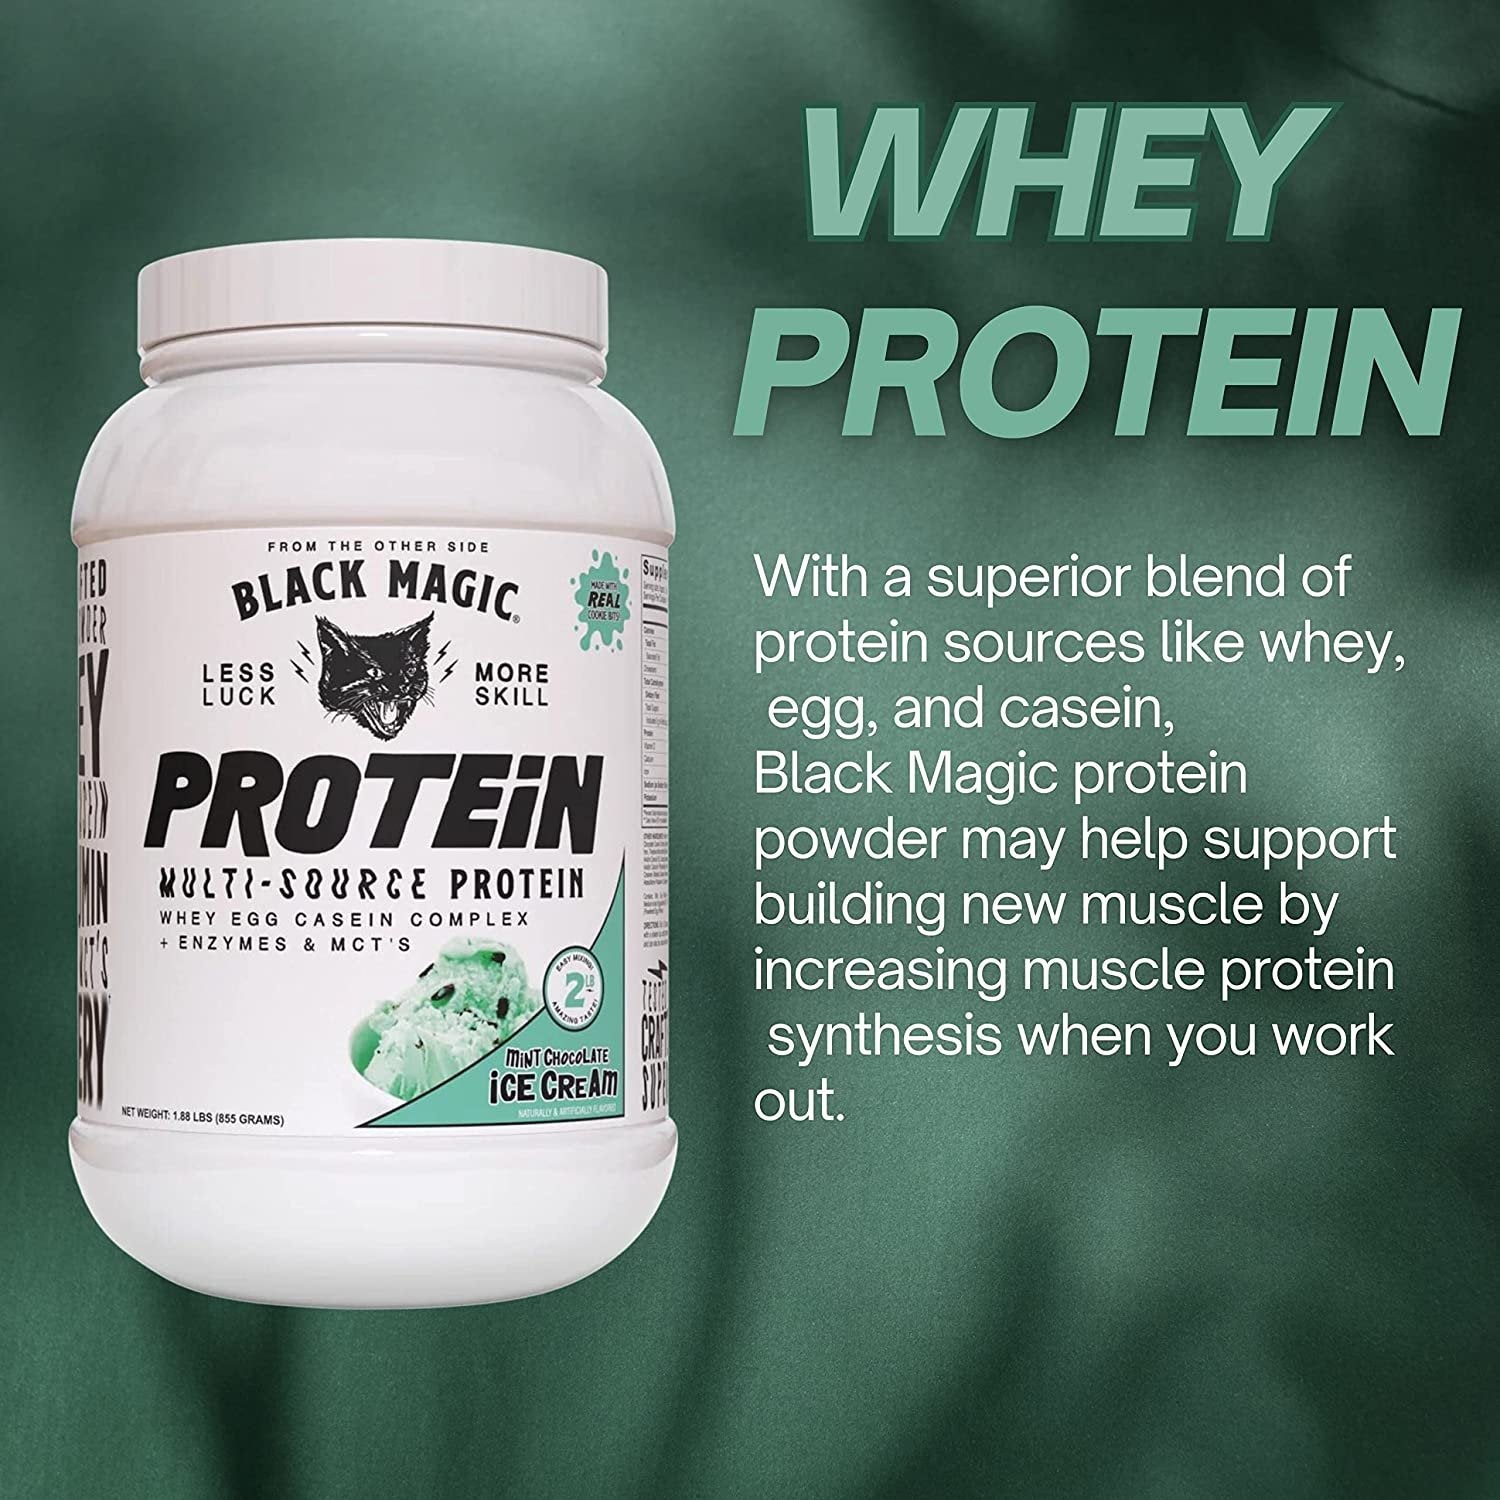 Mint Chocolate Black Magic Multi-Source Protein - Whey, Egg, and Casein Complex with Enzymes & MCT Powder - Pre Workout and Post Workout - 24g Protein - 2 LB with Bonus Key Chain